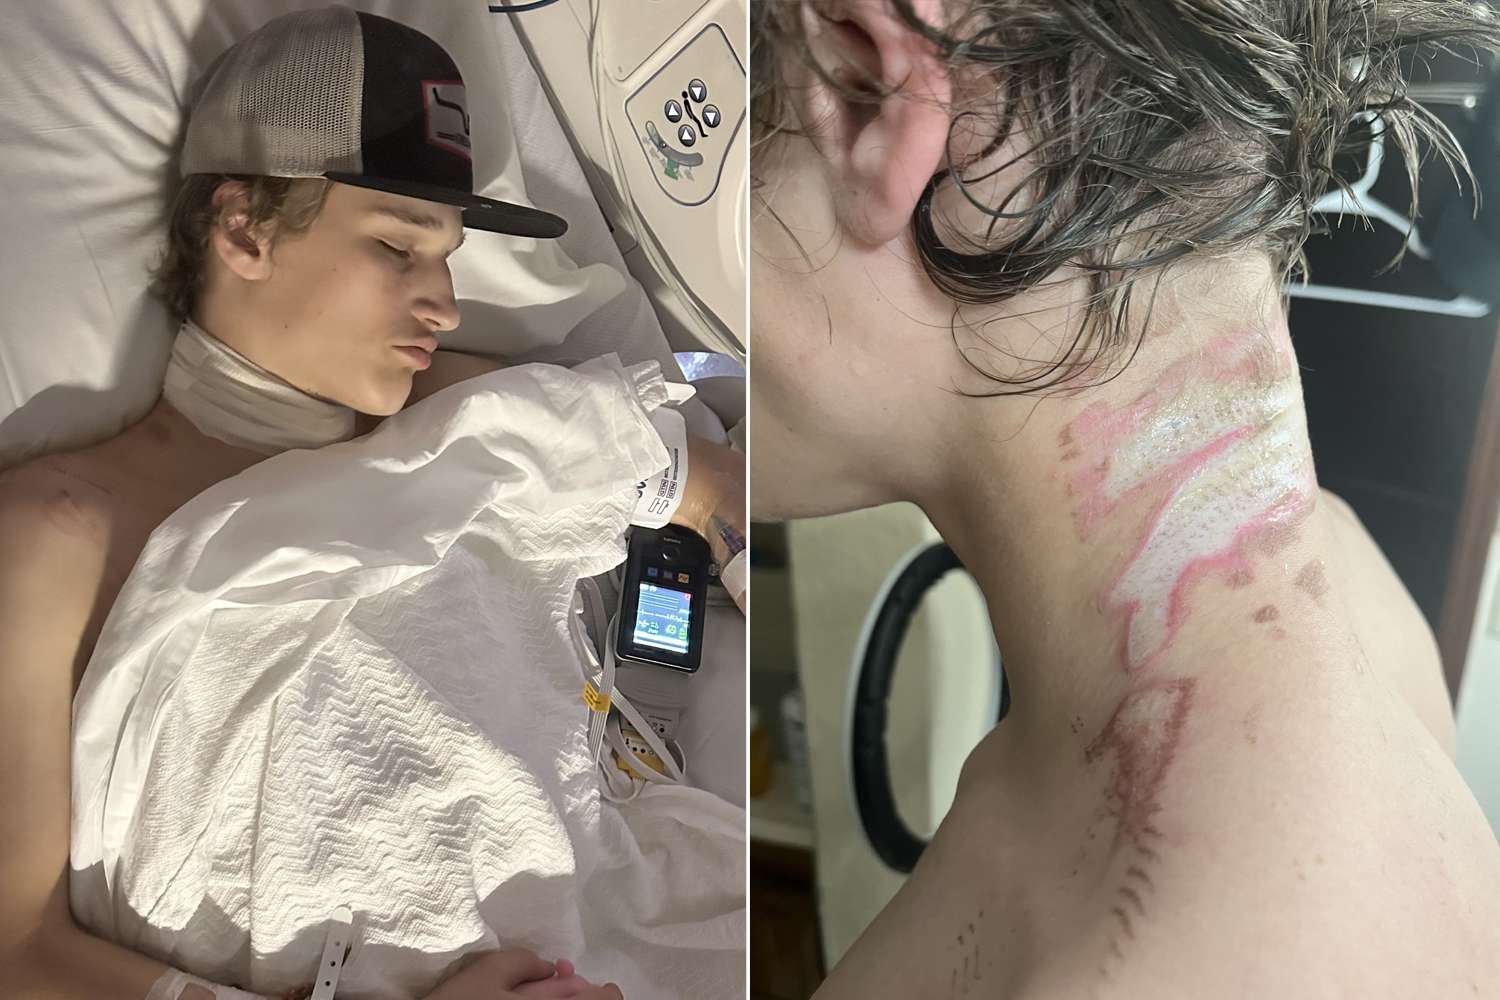 16-Year-Old Electrocuted by His Necklace in Freak Accident: 'It Was Like a Hot Coil'